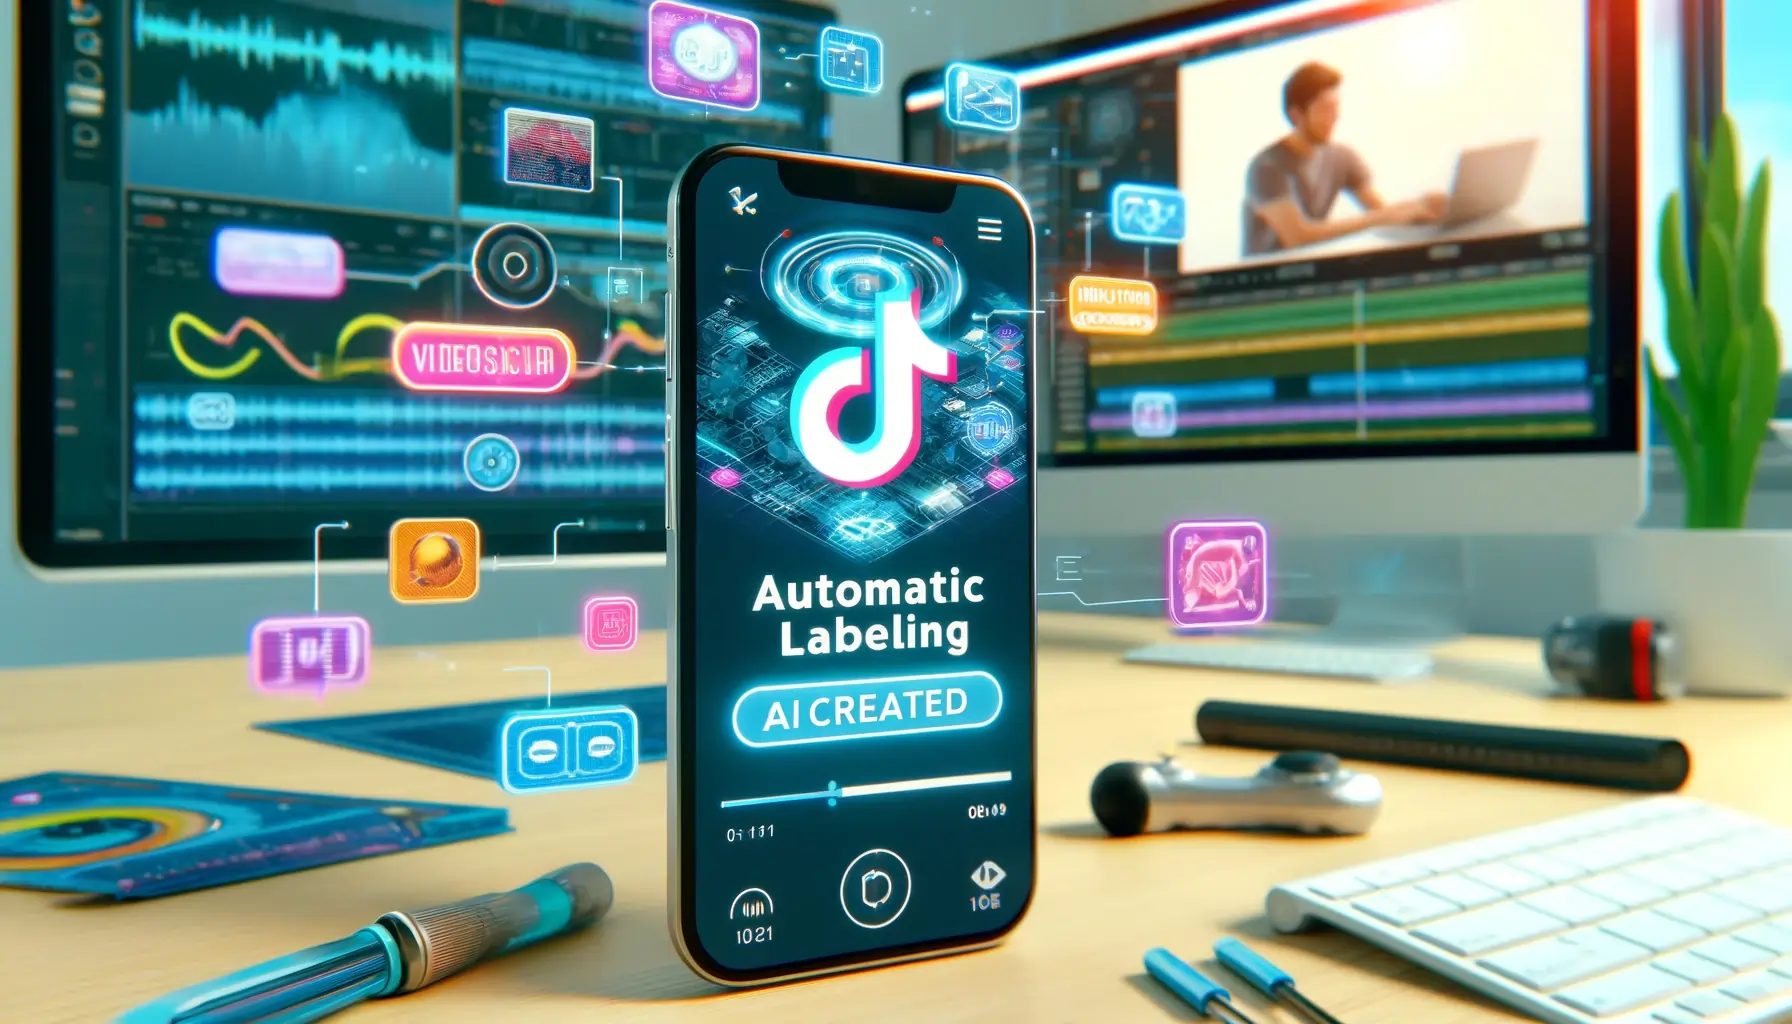 TikTok Introduces Automatic Labeling for AI-Created Content